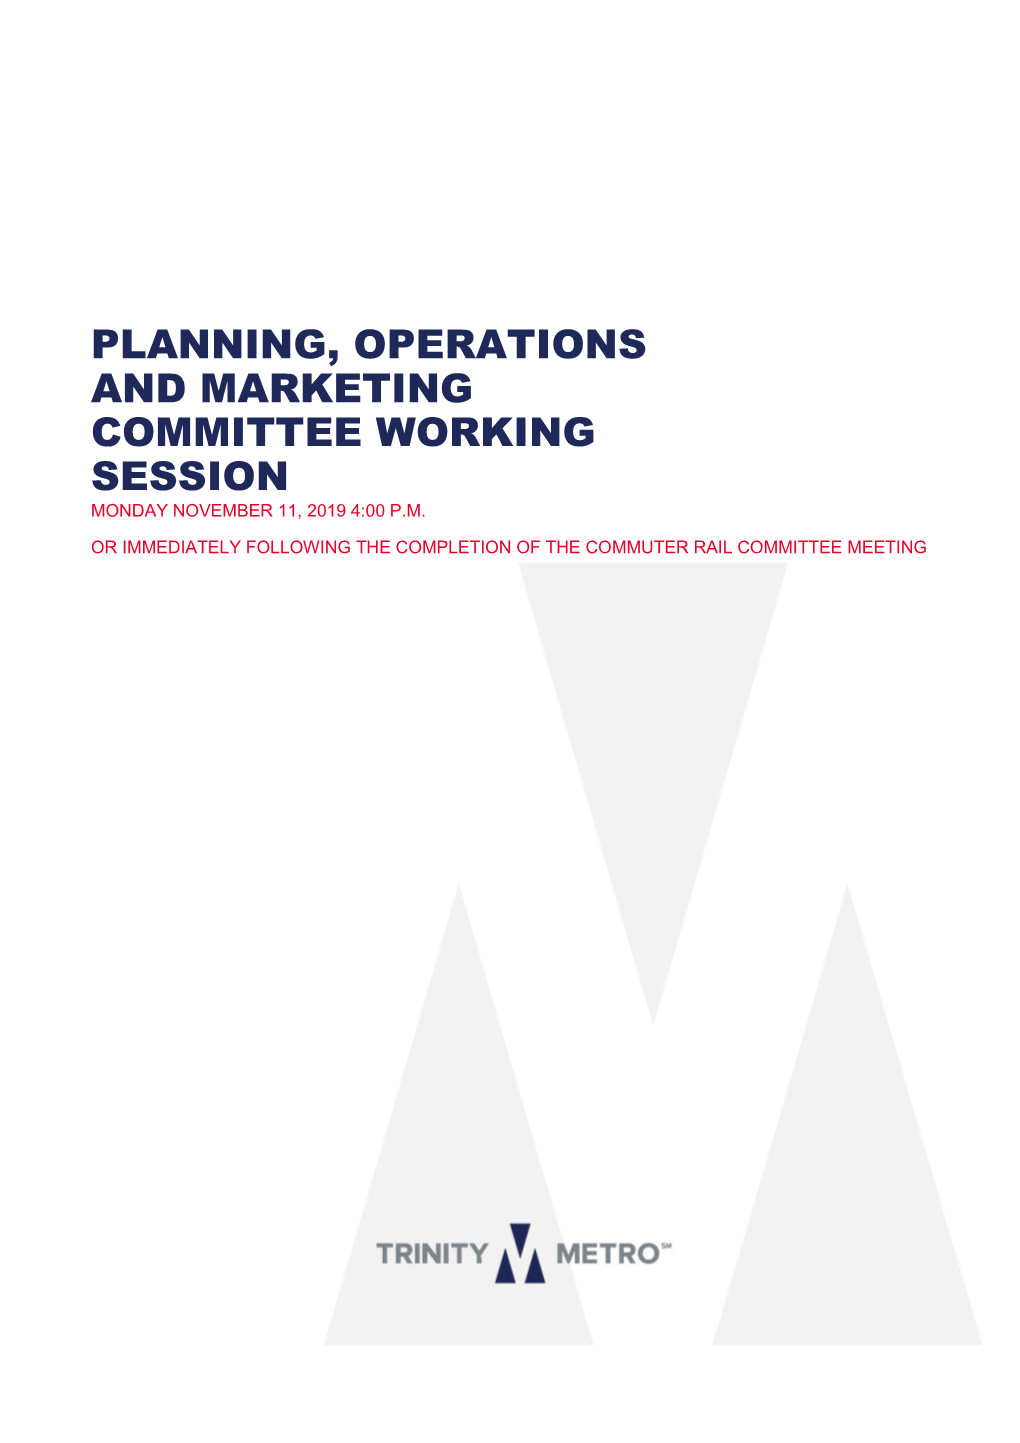 Planning, Operations and Marketing Committee Working Session Monday November 11, 2019 4:00 P.M